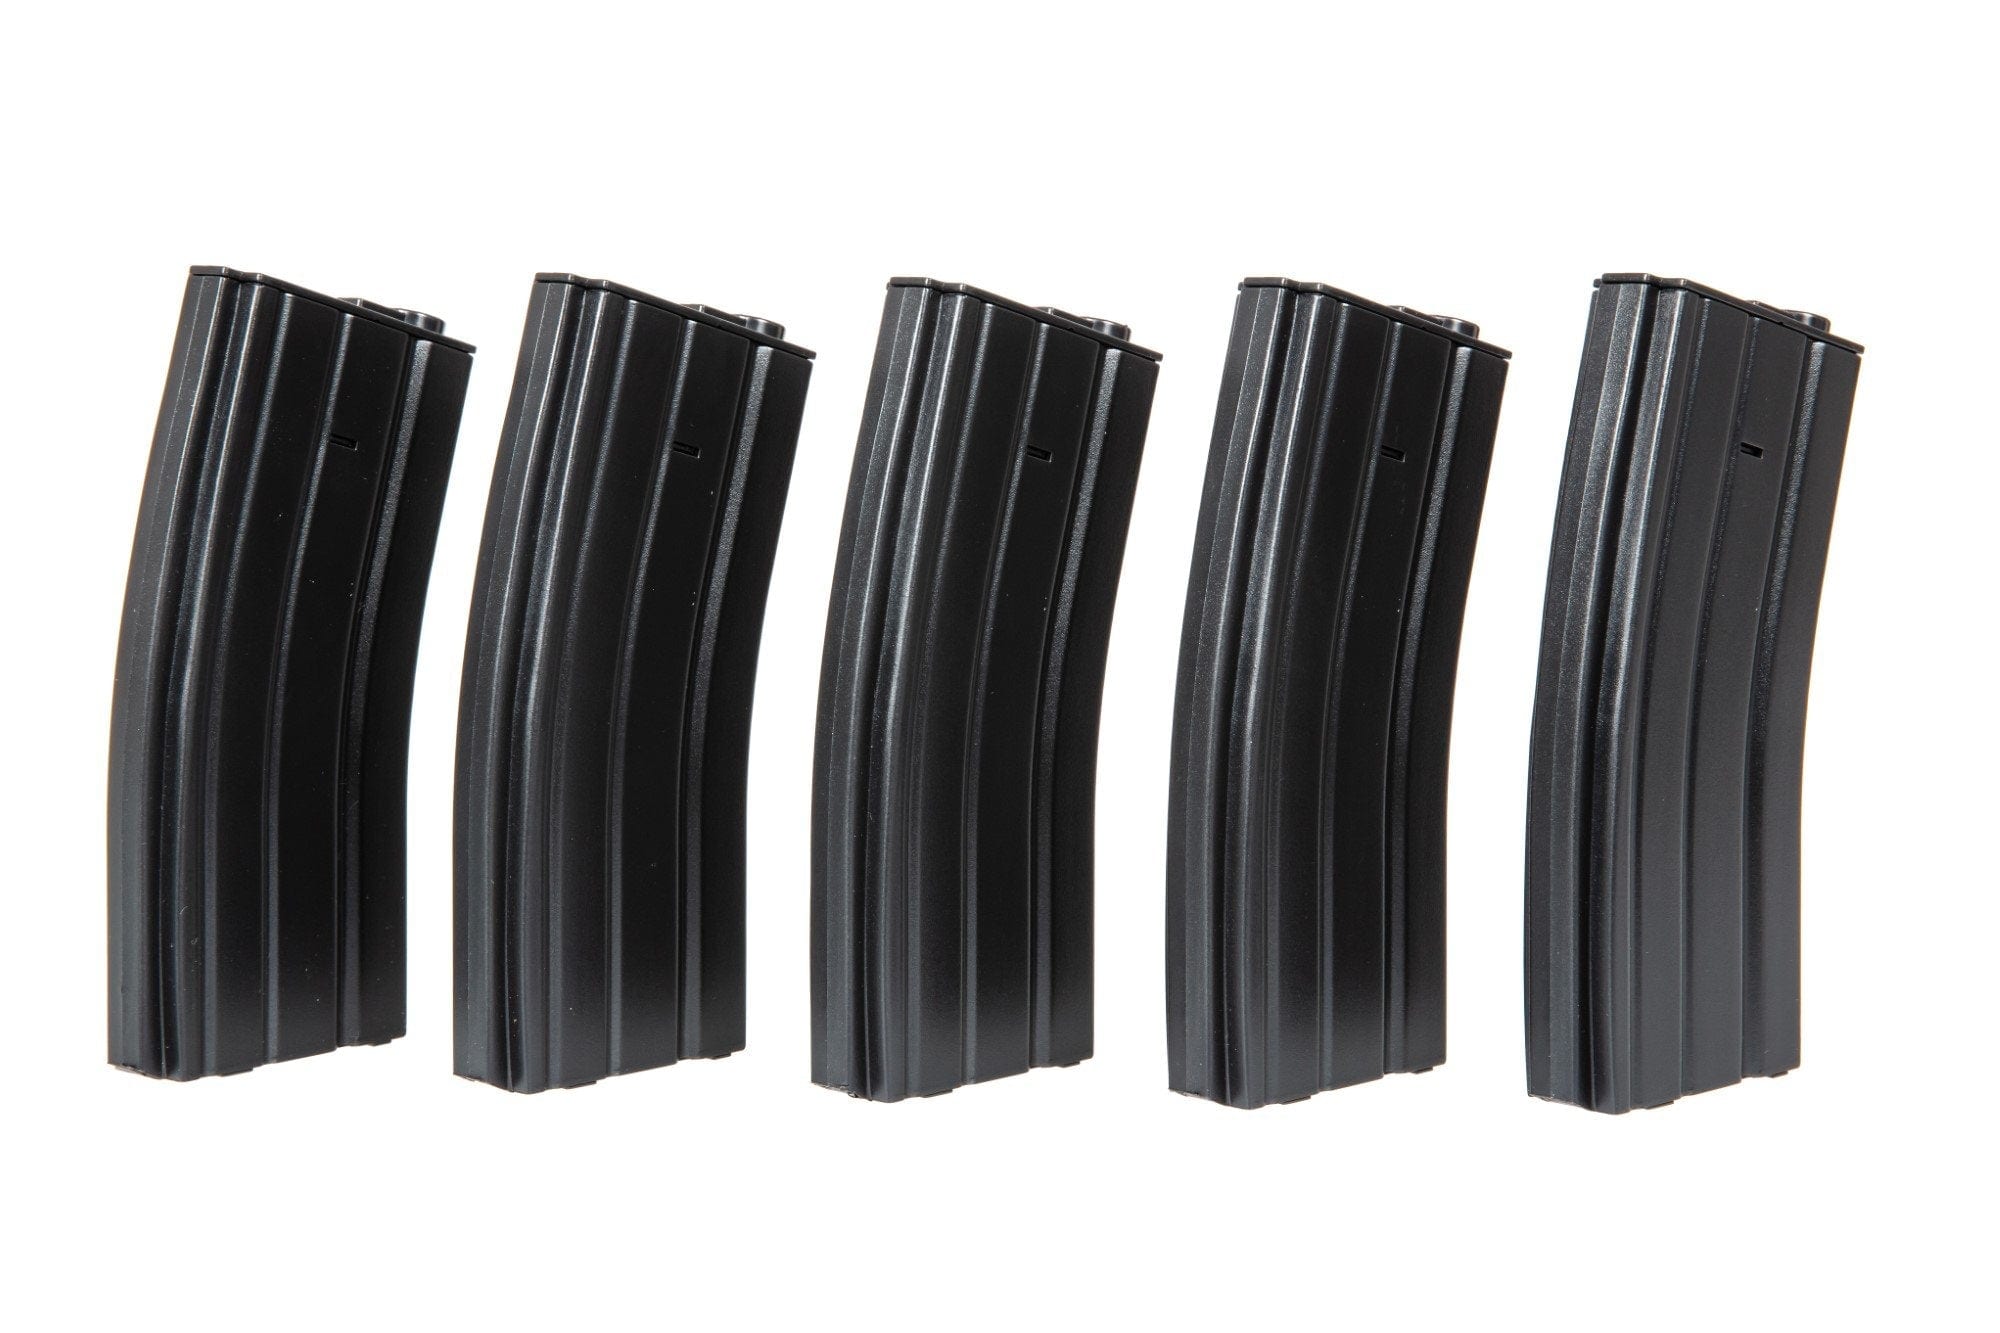 5pcs set - 70rd low-cap magazine for M4 / M16 - black by Specna Arms on Airsoft Mania Europe